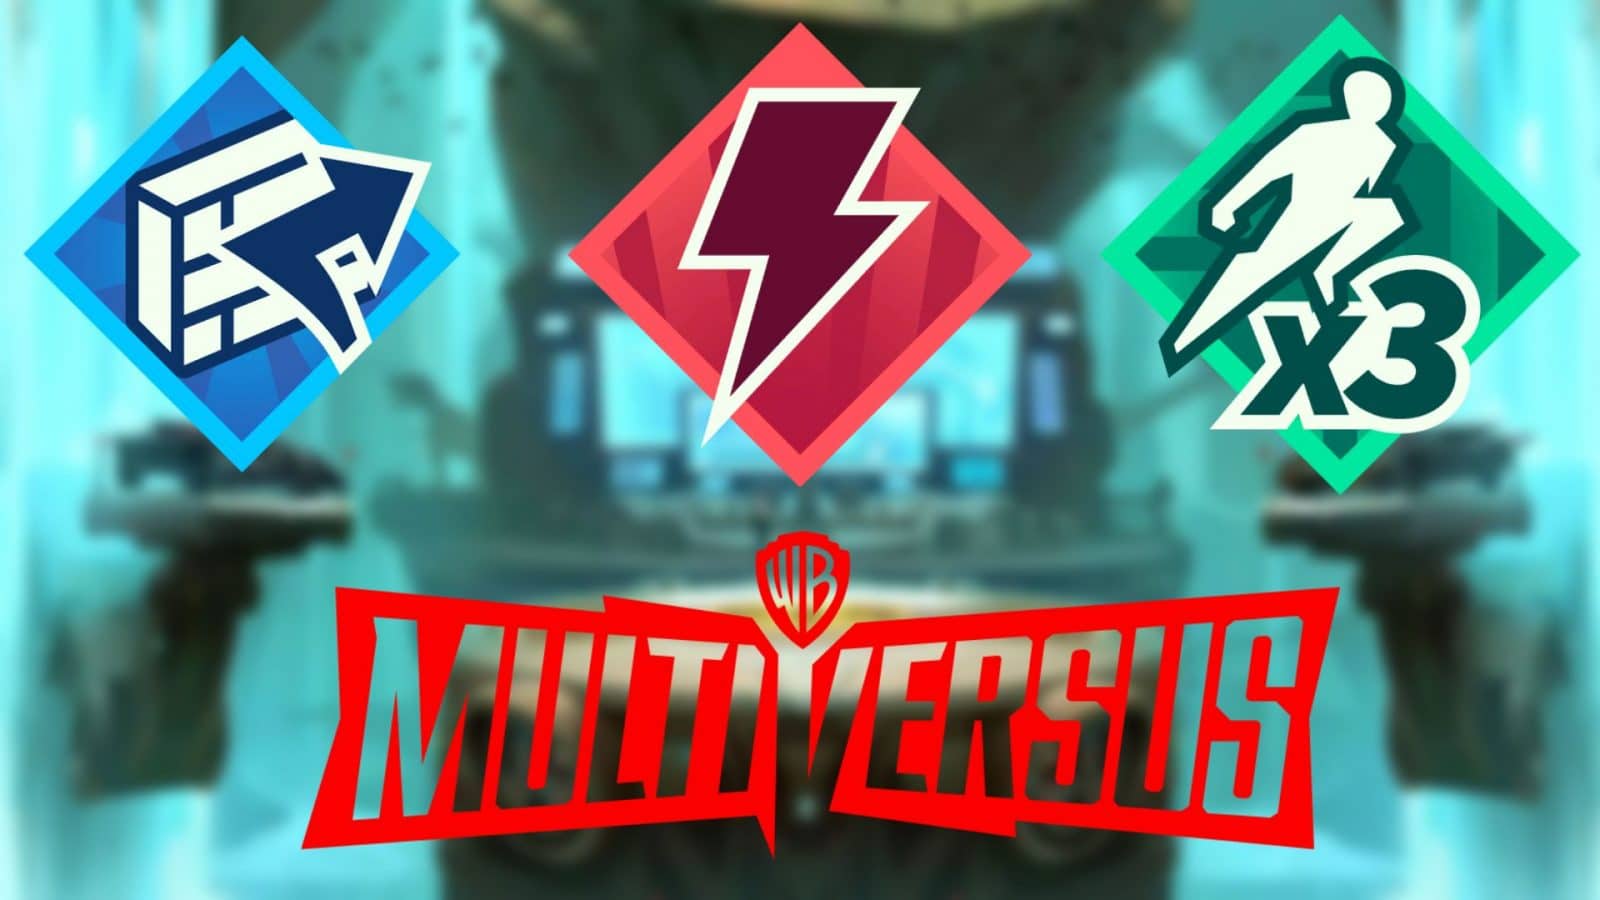 What Is the Max Level in 'MultiVersus'? Character Progression Explained